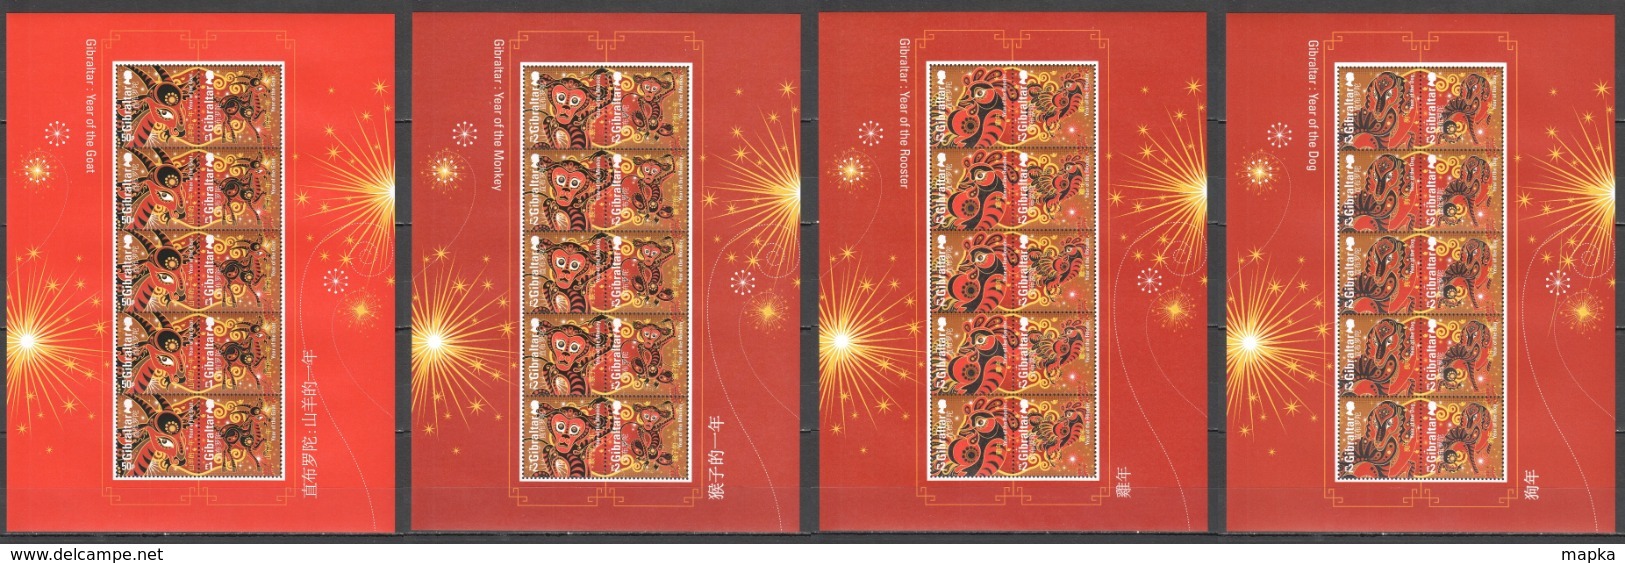 M229 2015-8 GIBRALTAR CELEBRATIONS YEAR OF THE GOAT MONKEY ROOSTER DOG MICHEL 191 EURO !!! 4SH 20SET MNH - Chinese New Year